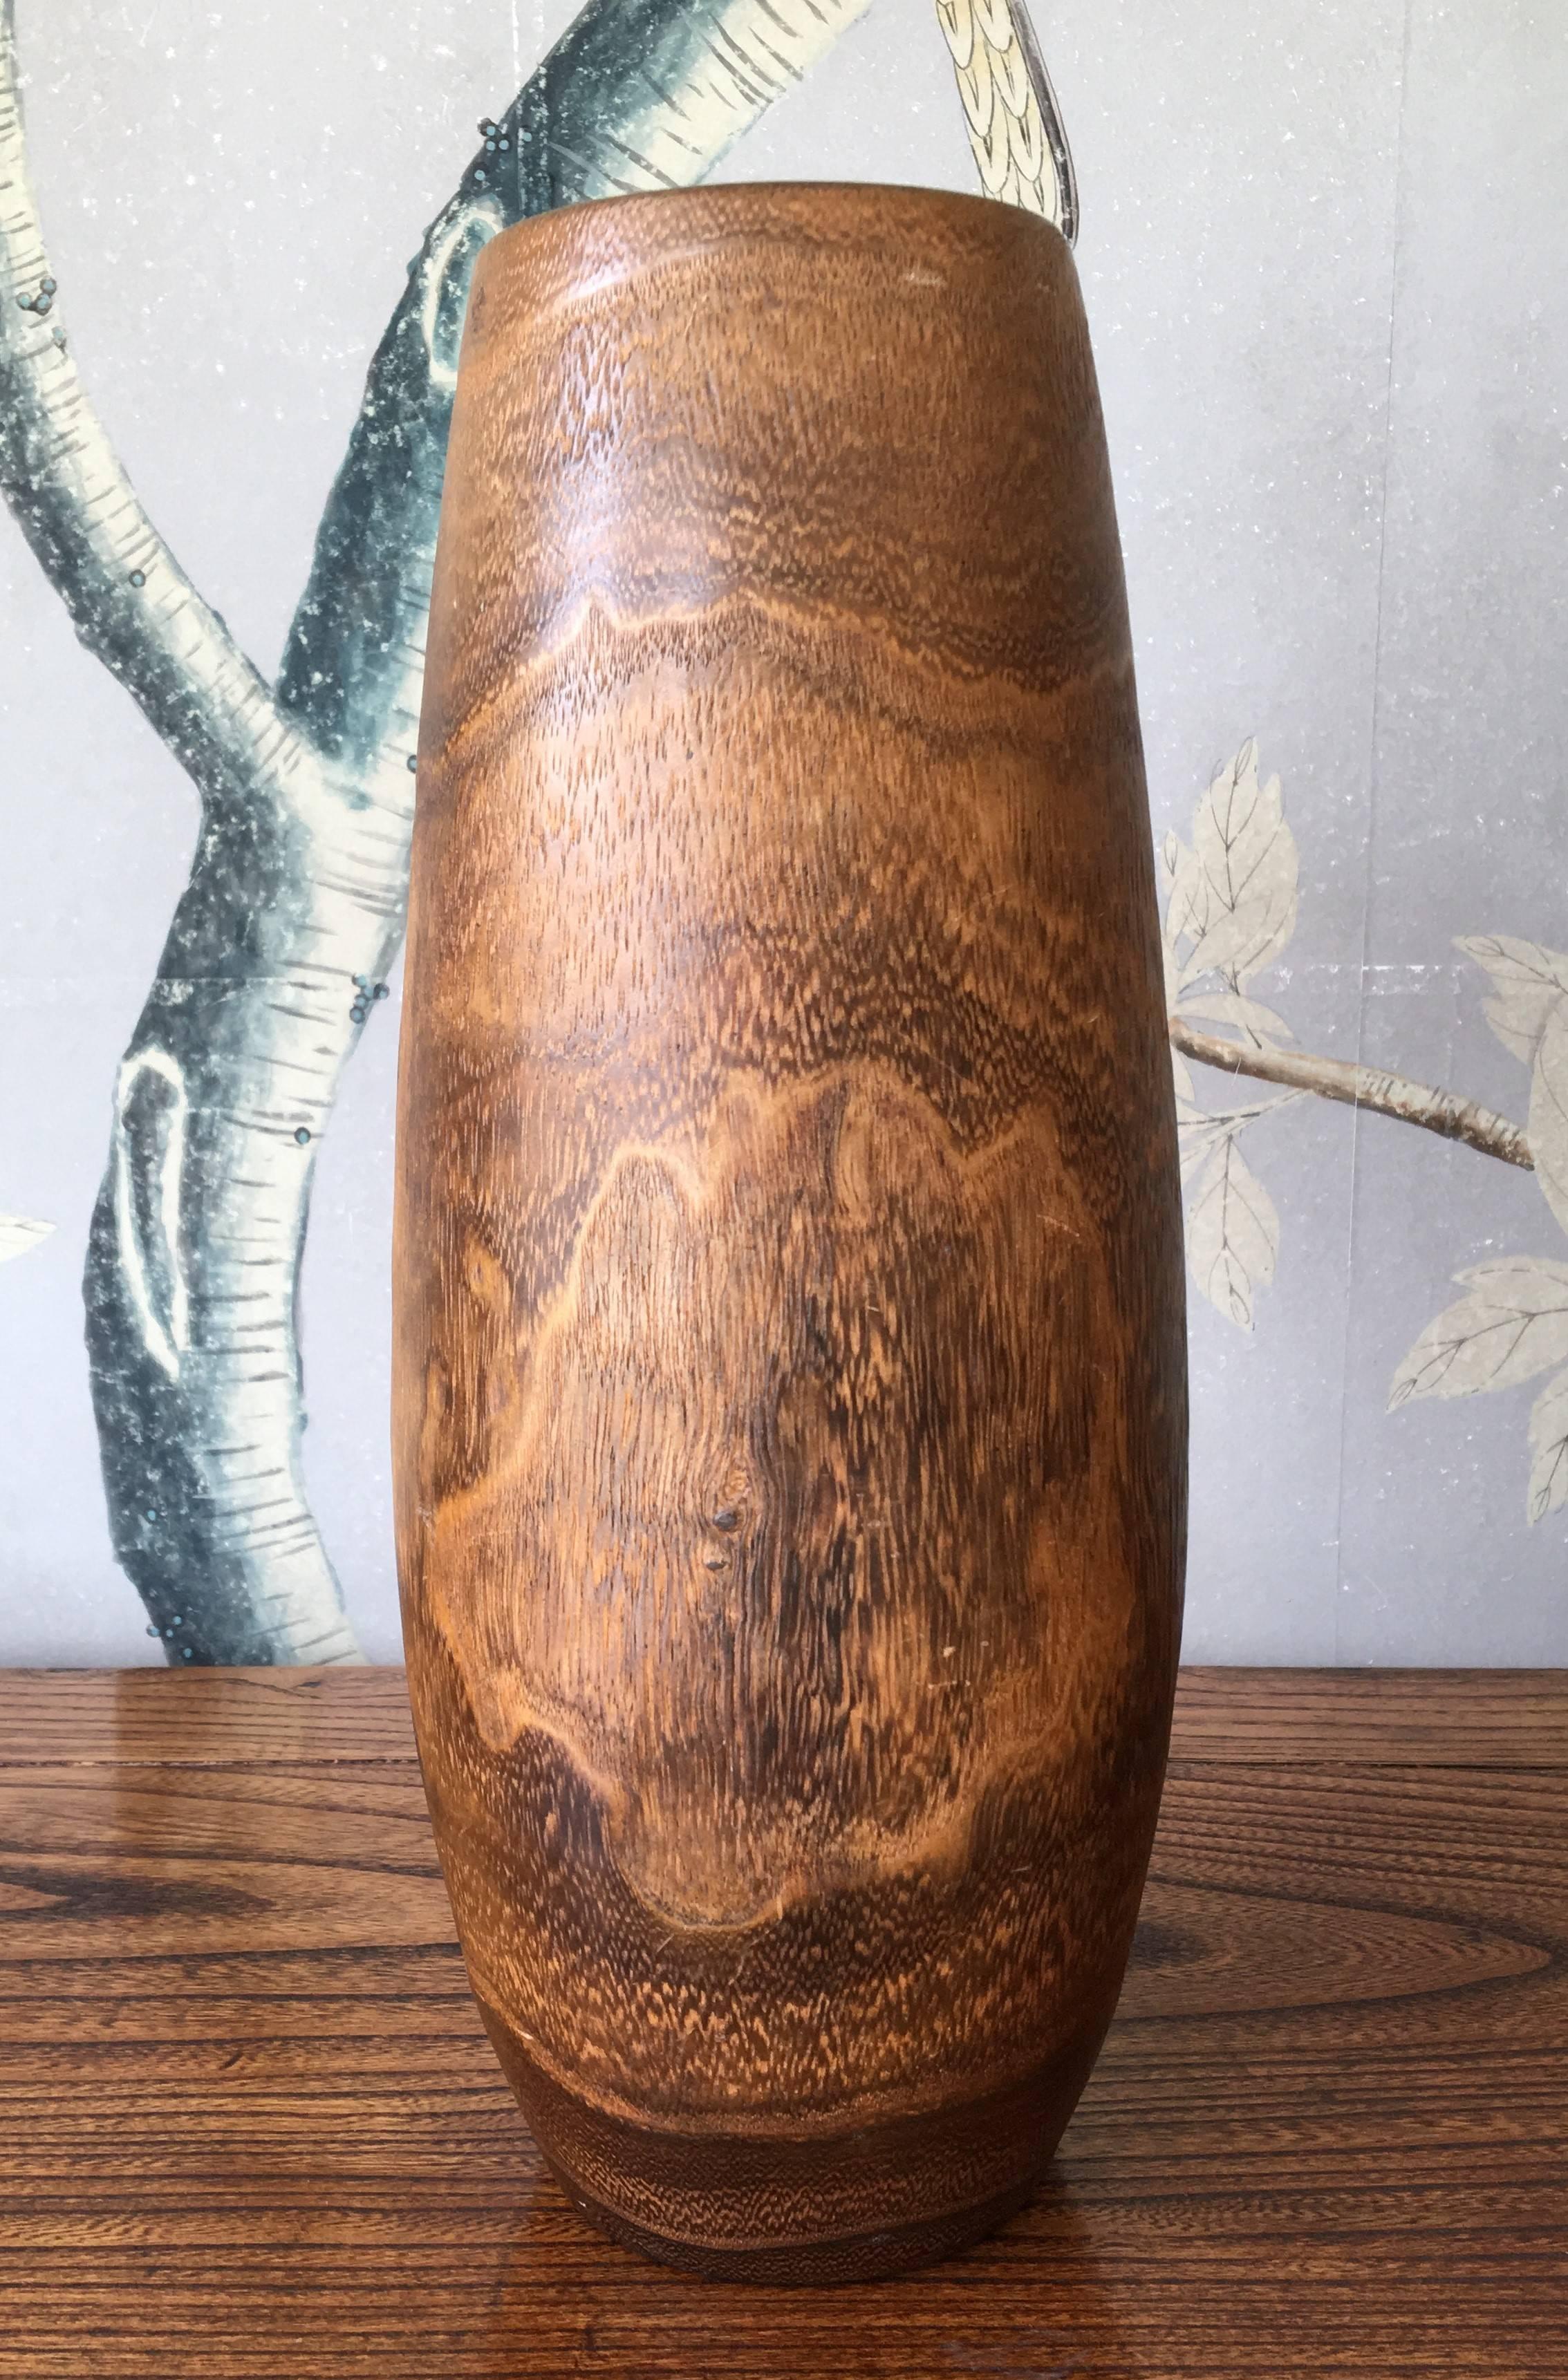 An antique Japanese hand-carved wooden Ikebana vase with design of birds and leaves with a copper liner. Great for flower displays.